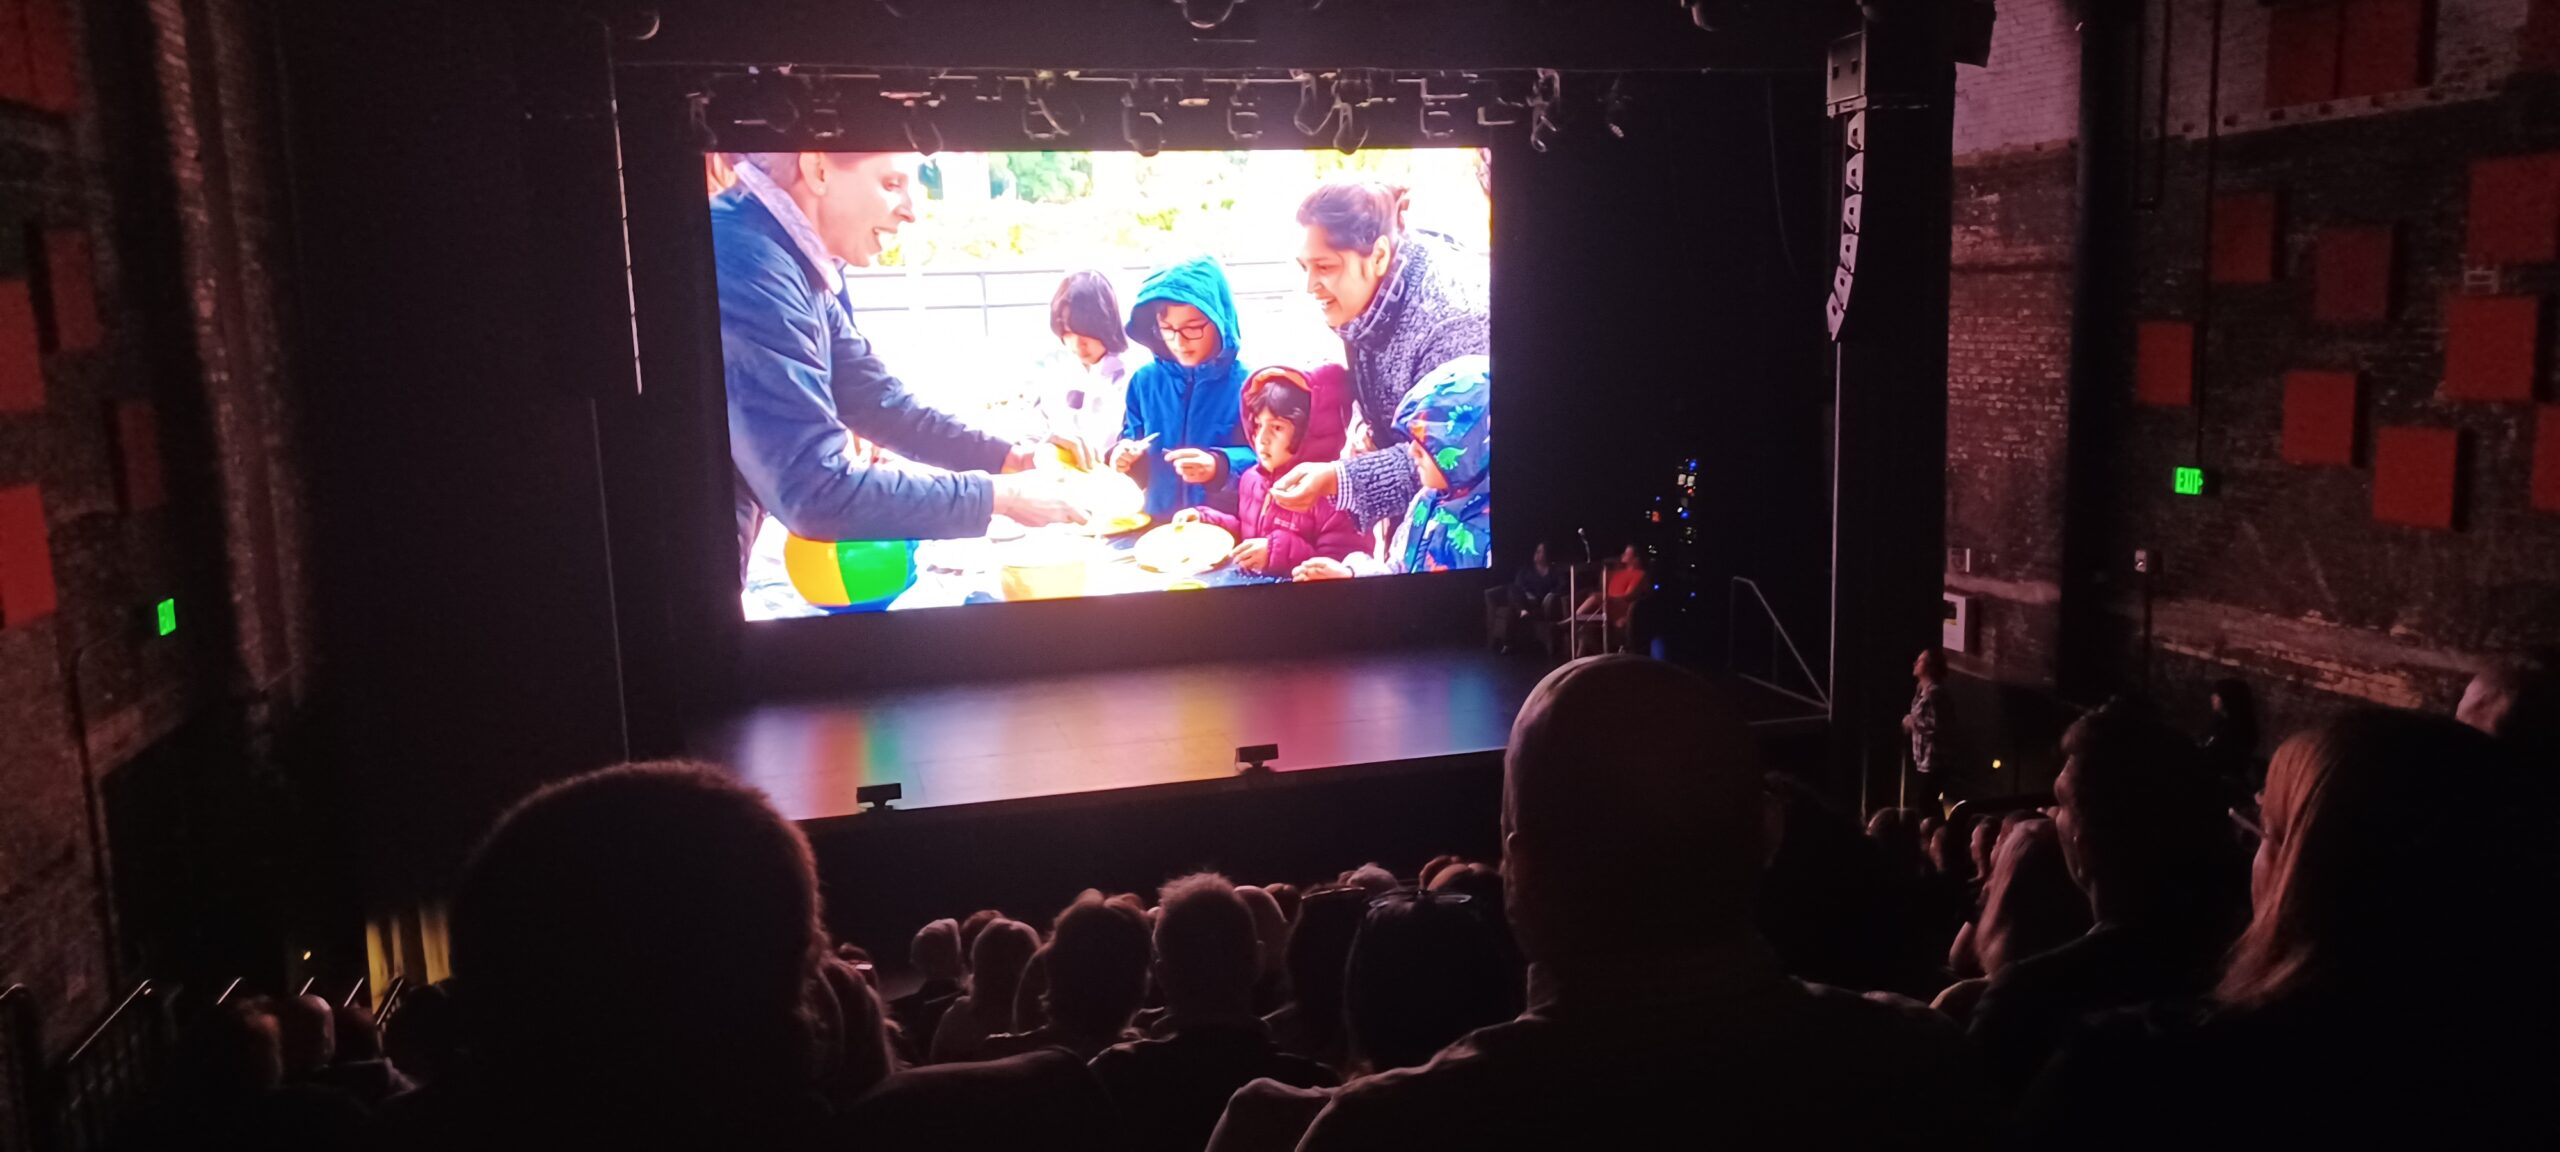 image of Shana interacting with a family on screen at the event